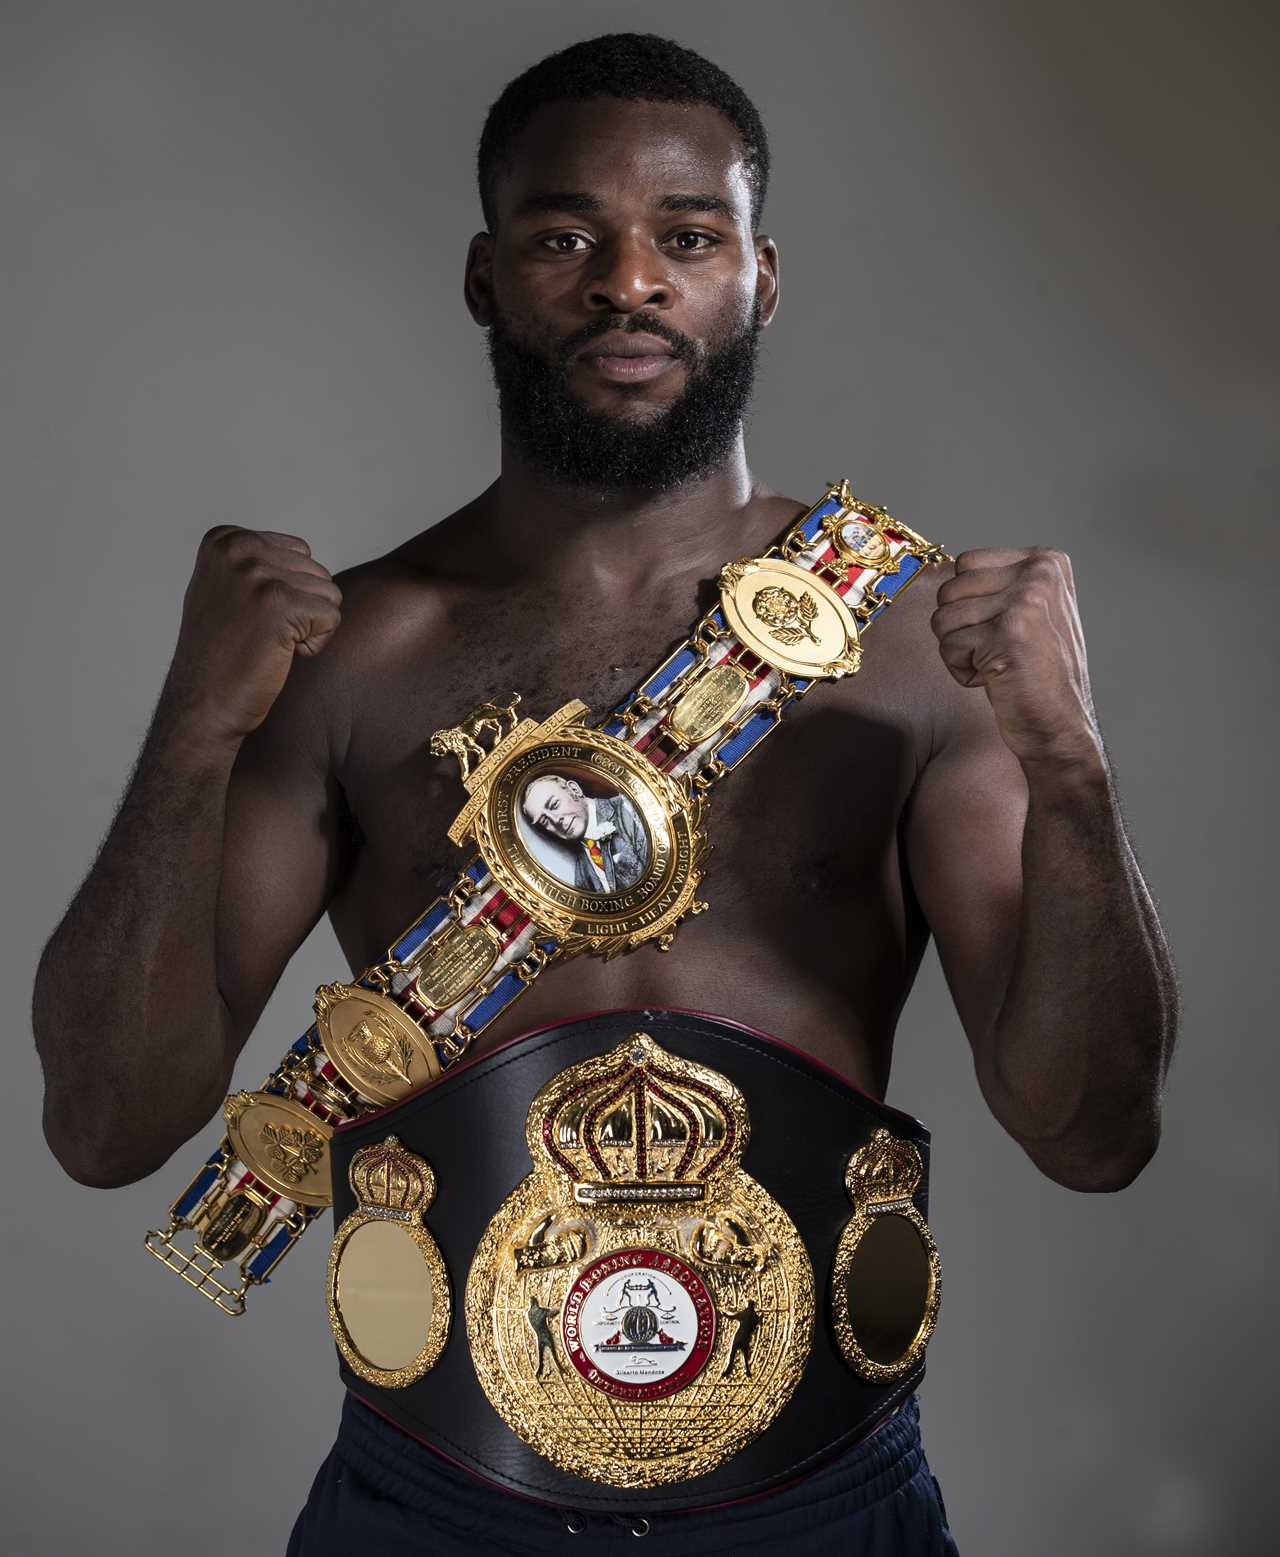 Joshua Buatsi - An Insight into the Career and Life of an Undefeated Fighter